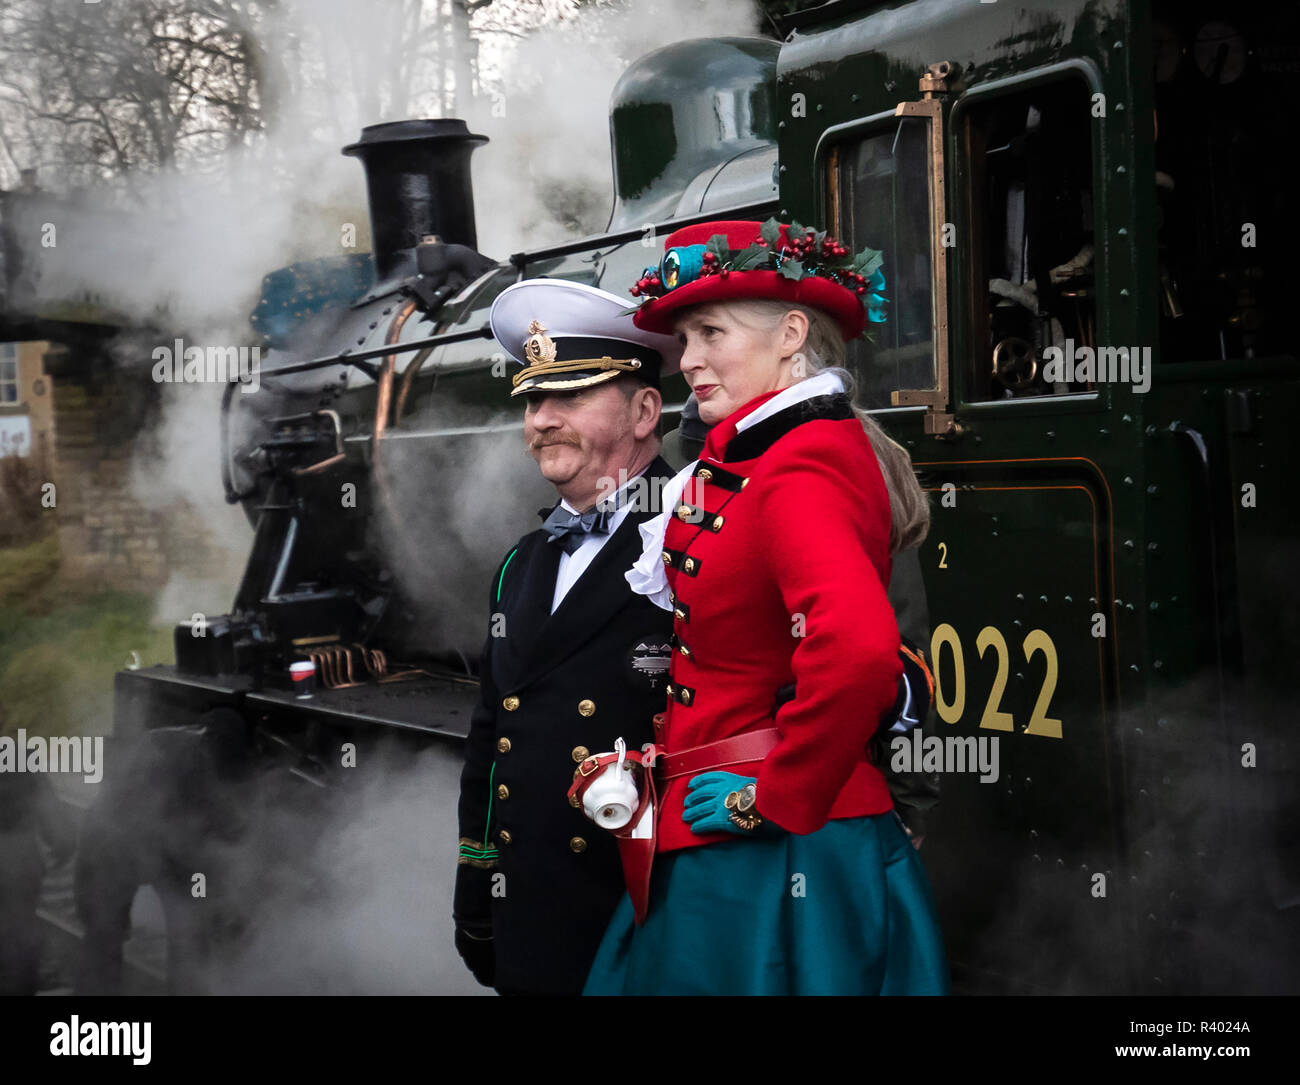 Steampunks next to a steam locomotive during the Haworth Steampunk Weekend, as hundreds of Steampunks descend on the quite village of Haworth in the Pennine hills of West Yorkshire, England. Stock Photo